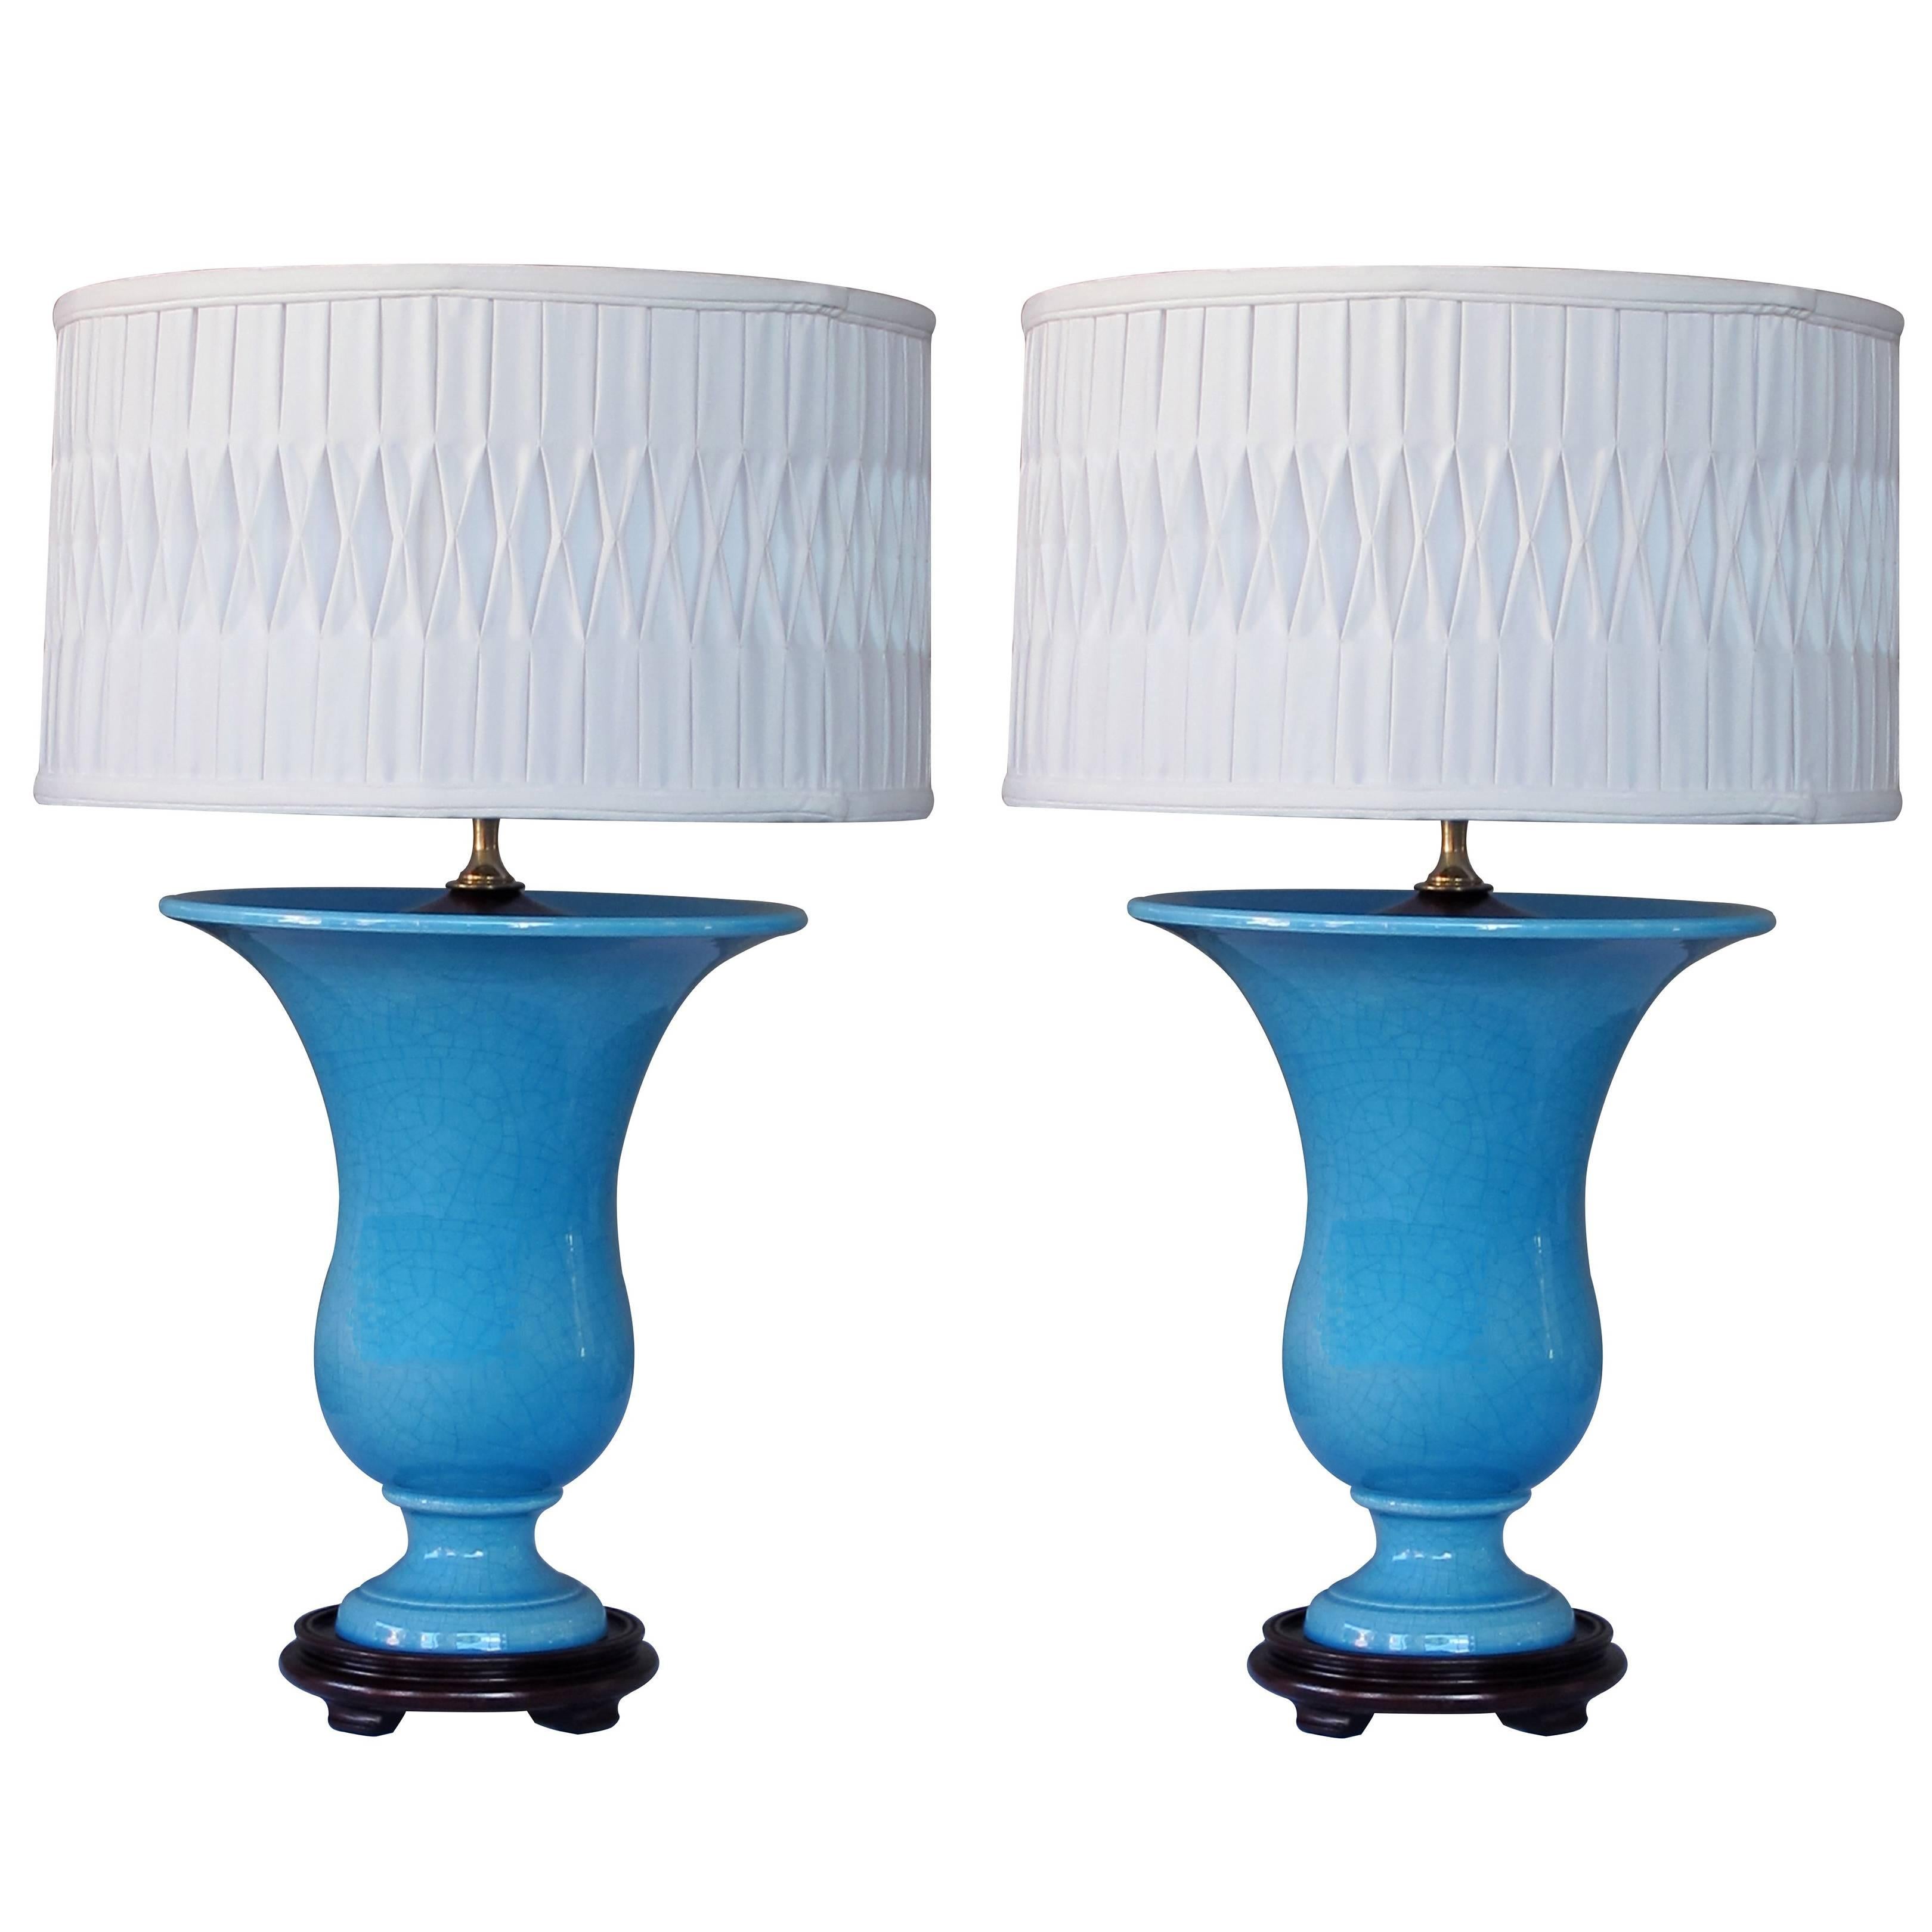 Striking Pair of French Art Deco Turquoise Crackle-Glazed Urns Now Lamps